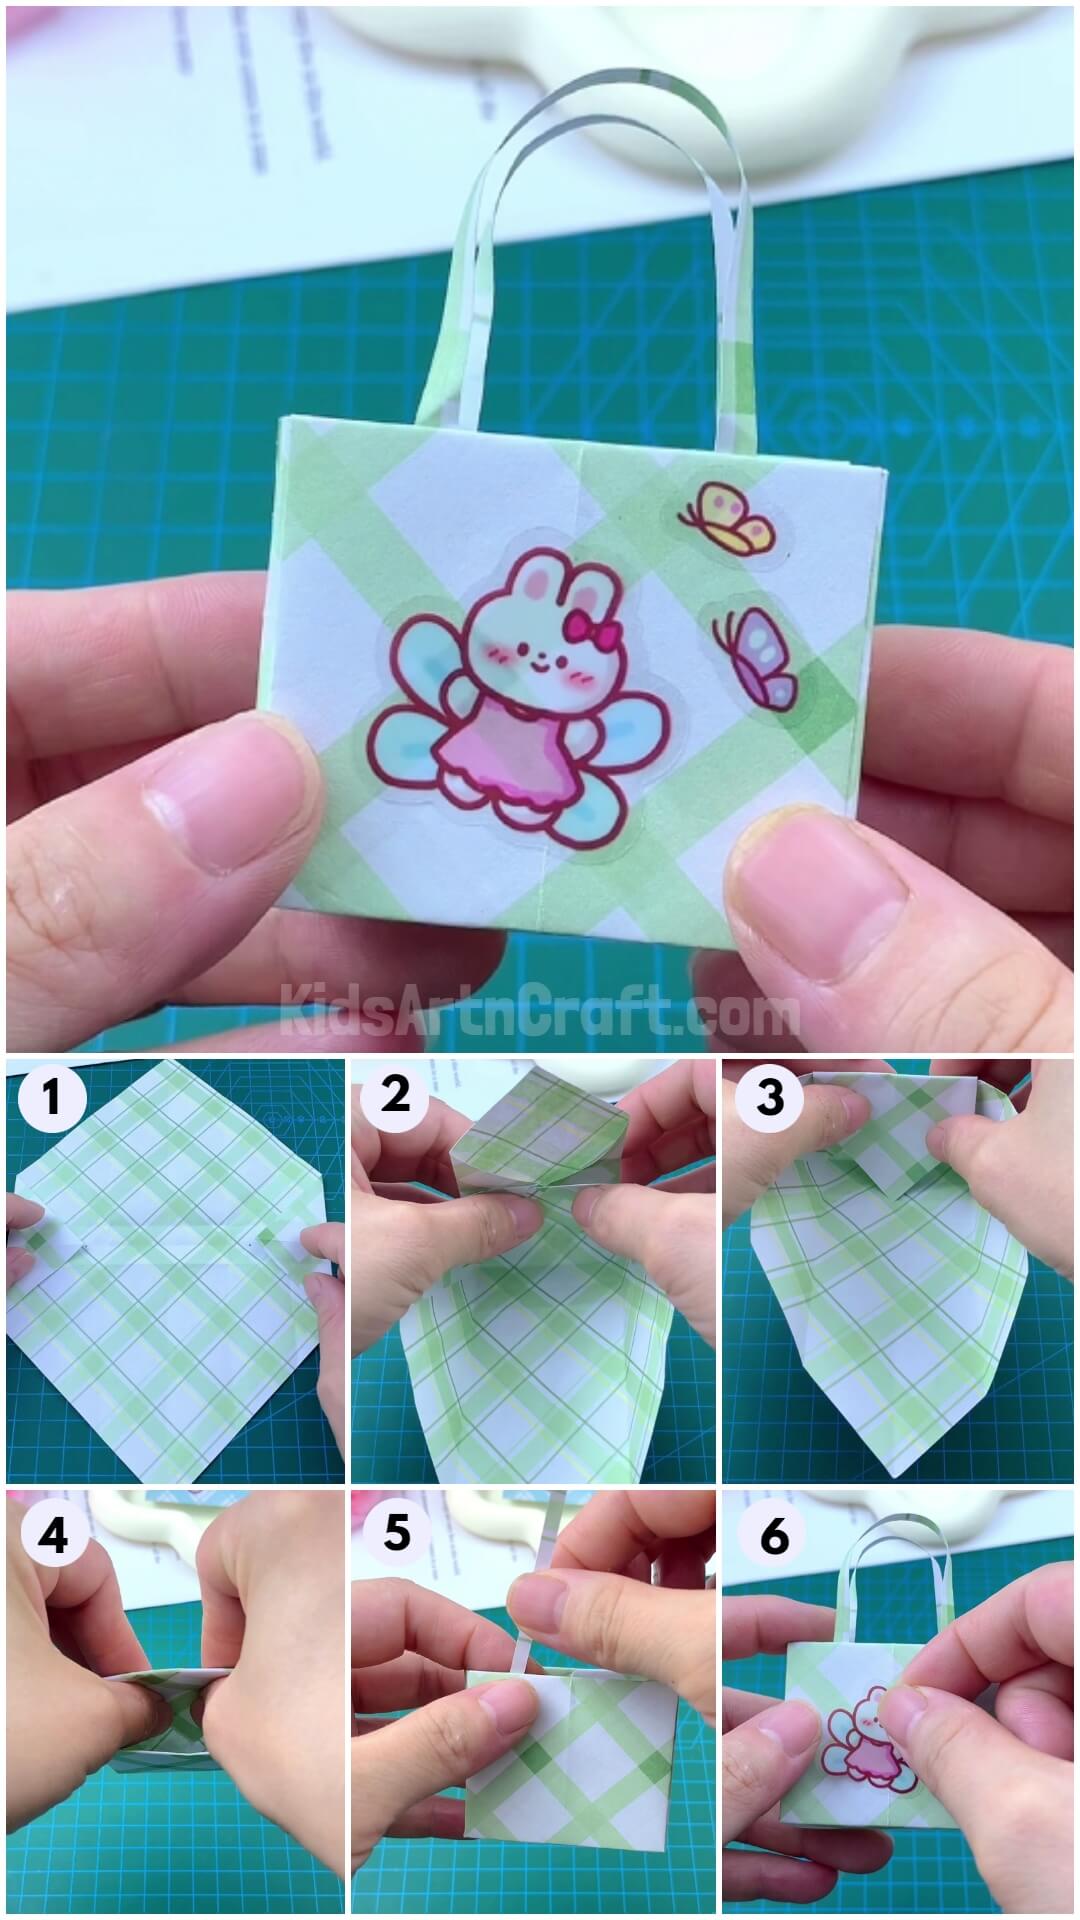 Cute Mini Paper Origami Bags Craft Step by Step Tutorial For kids